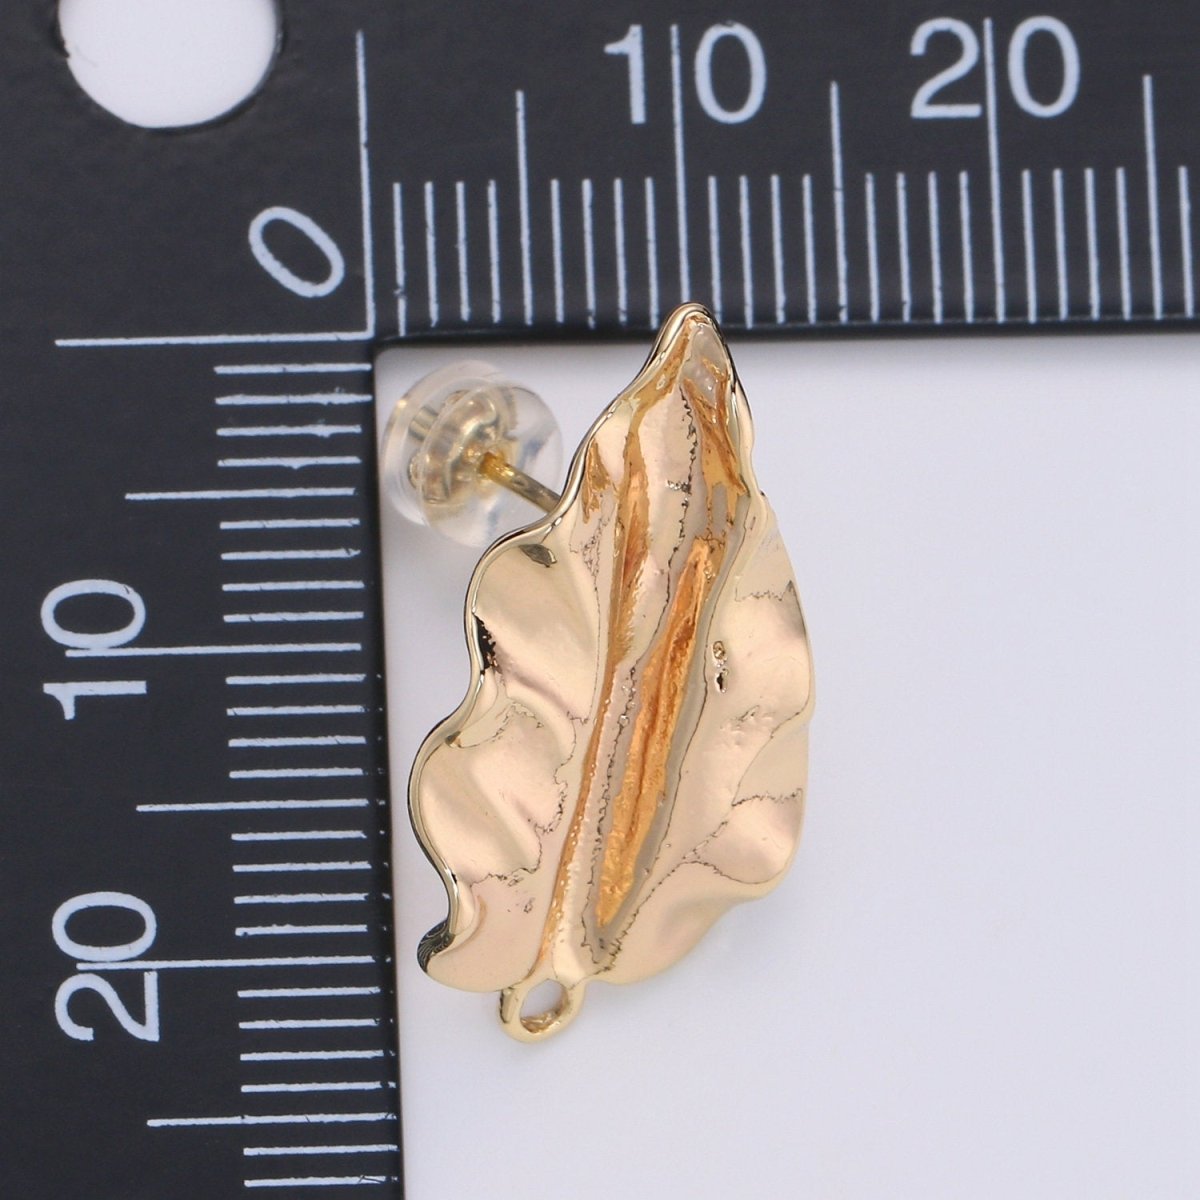 Fall Leaf Stud Earring Gold Vermeil Foliage Earring DIY Jewelry Component for Christmas Gift L-012 - DLUXCA